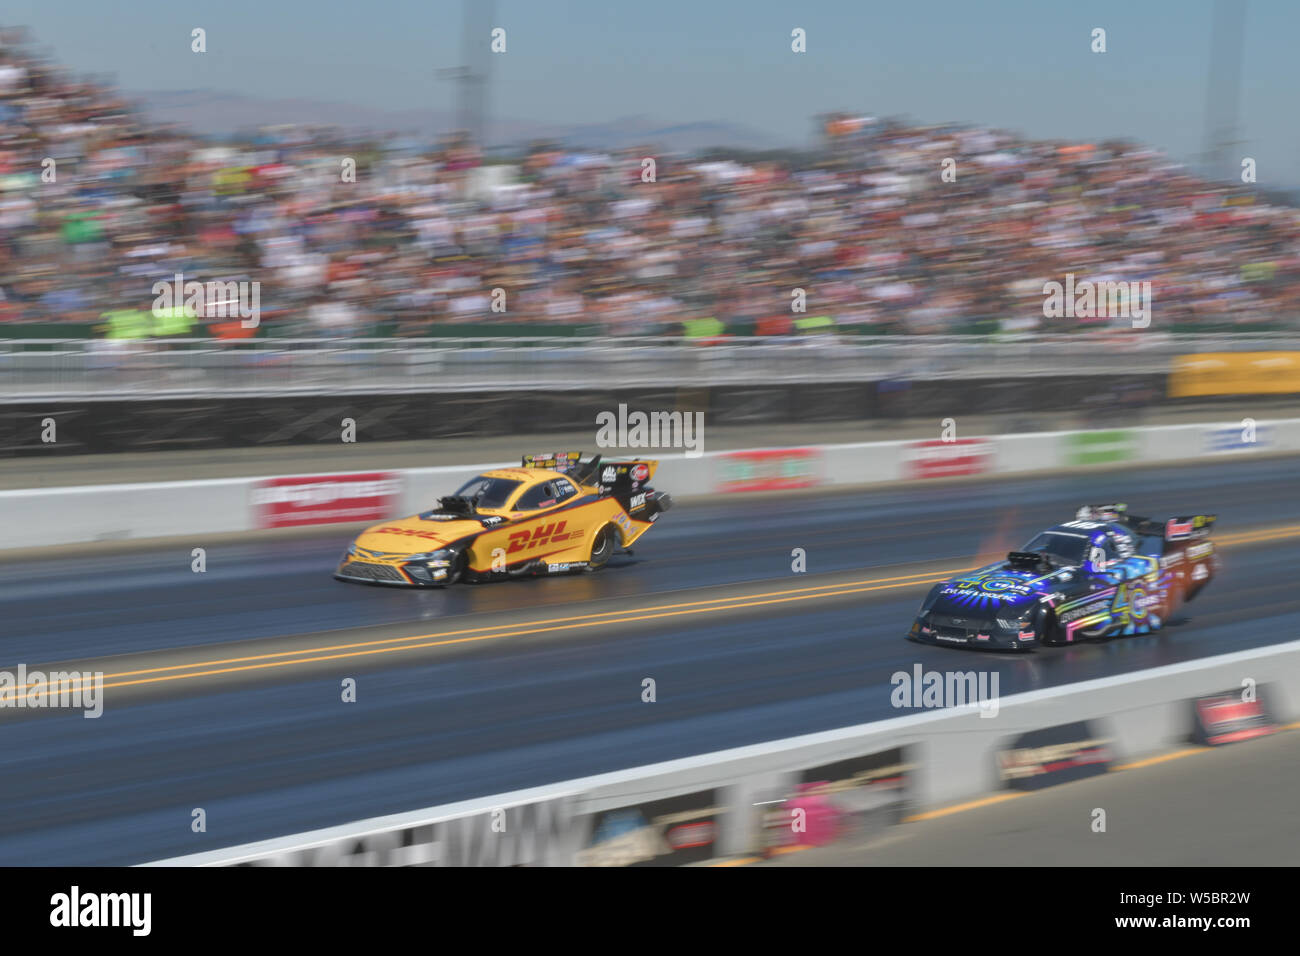 Sonoma, California, USA. 27th July, 2019. J.R. Todd in the DHL car runs against Tom Wilkerson during the NHRA Sonoma Nationals at Sonoma Raceway in Sonoma, California. Chris Brown/CSM/Alamy Live News Stock Photo